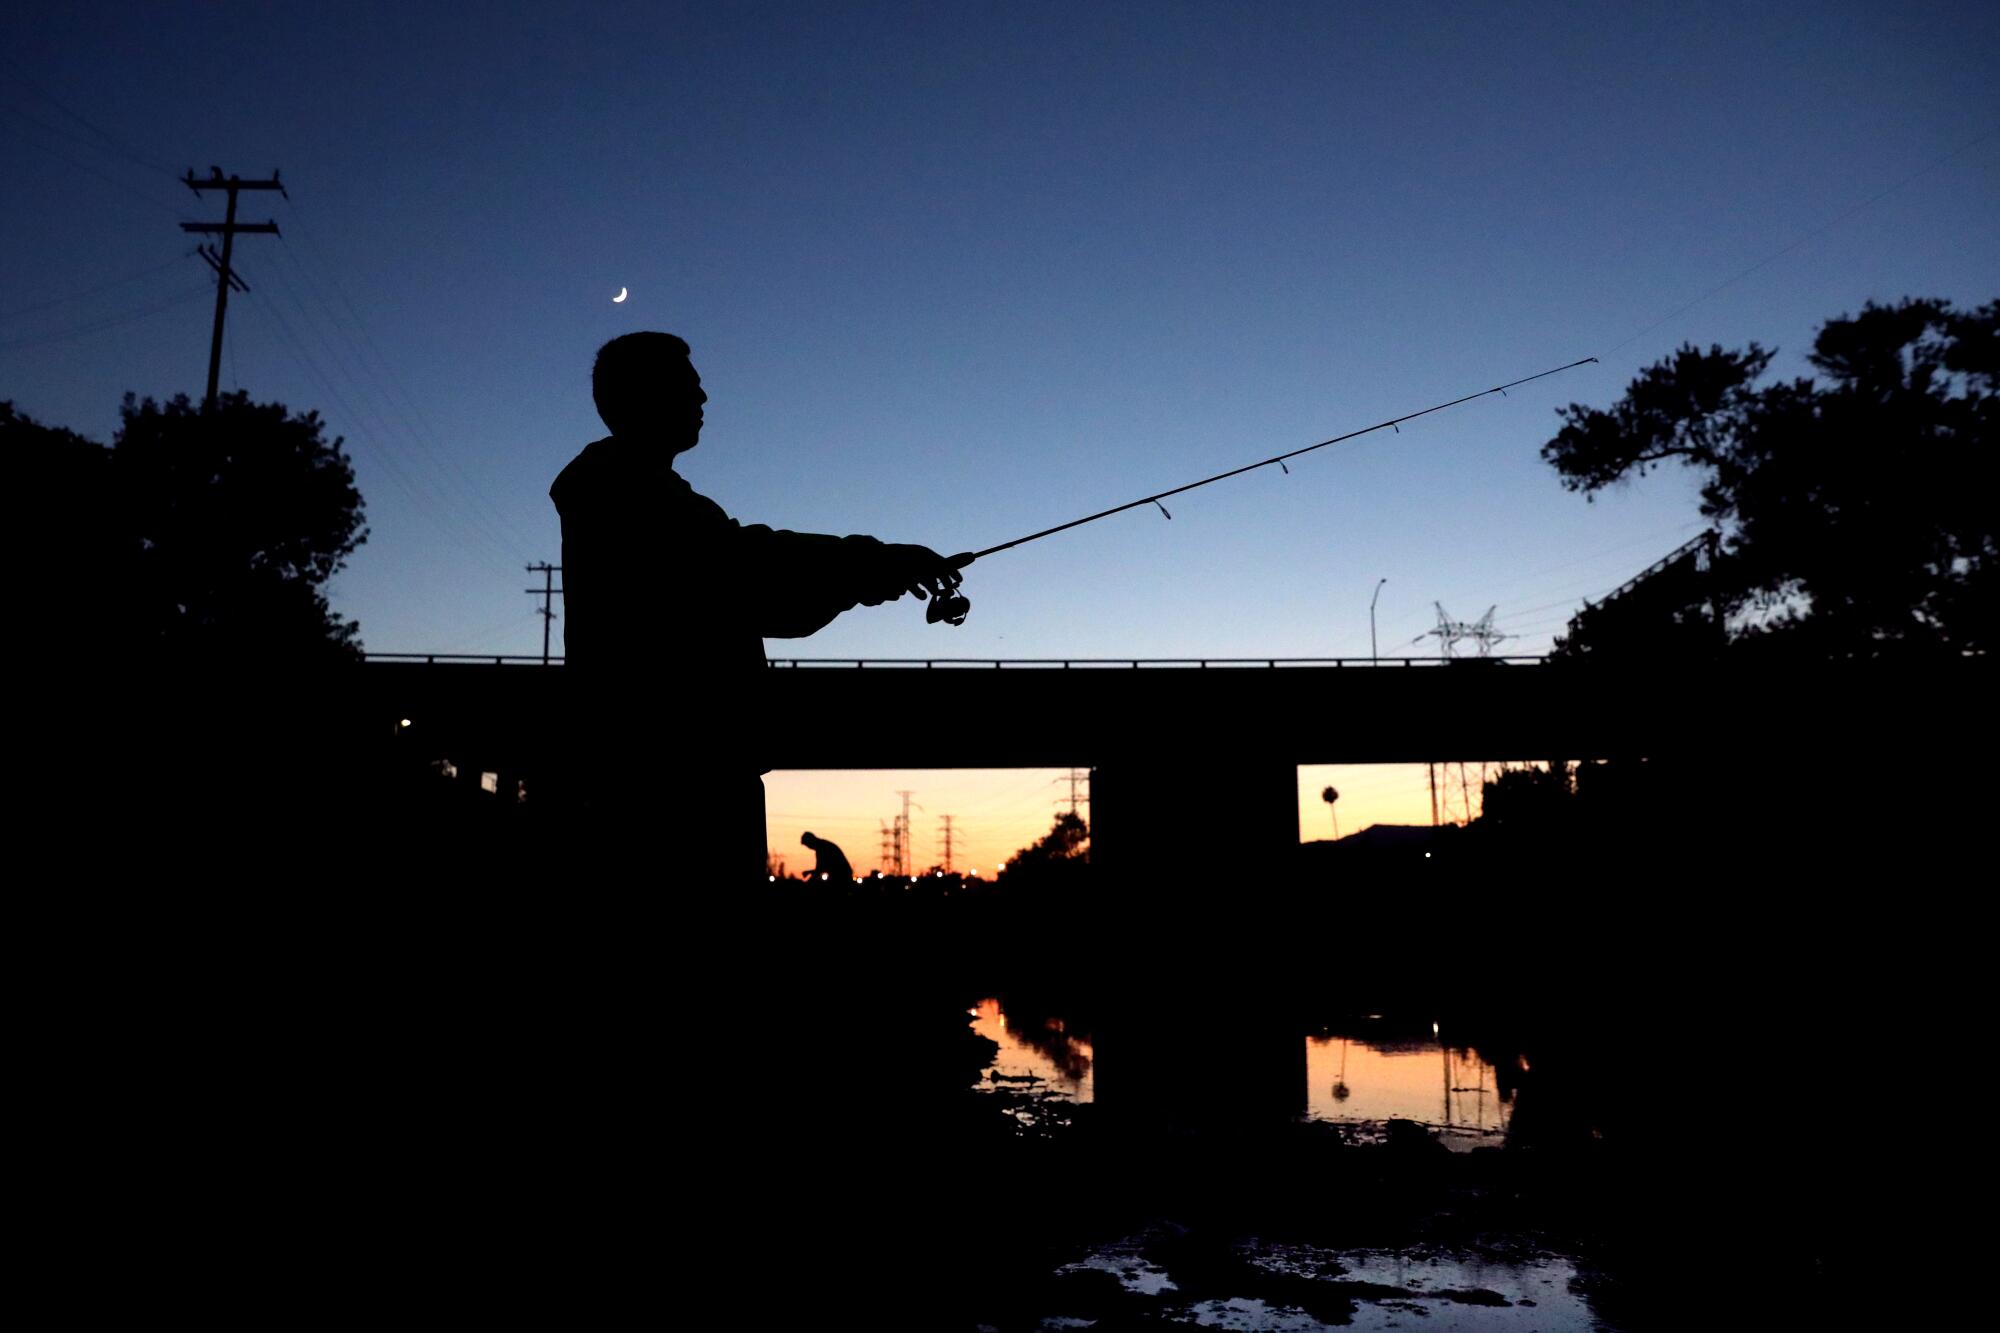 Alvarez, castging into the river, is silhouetted as the sun sets 